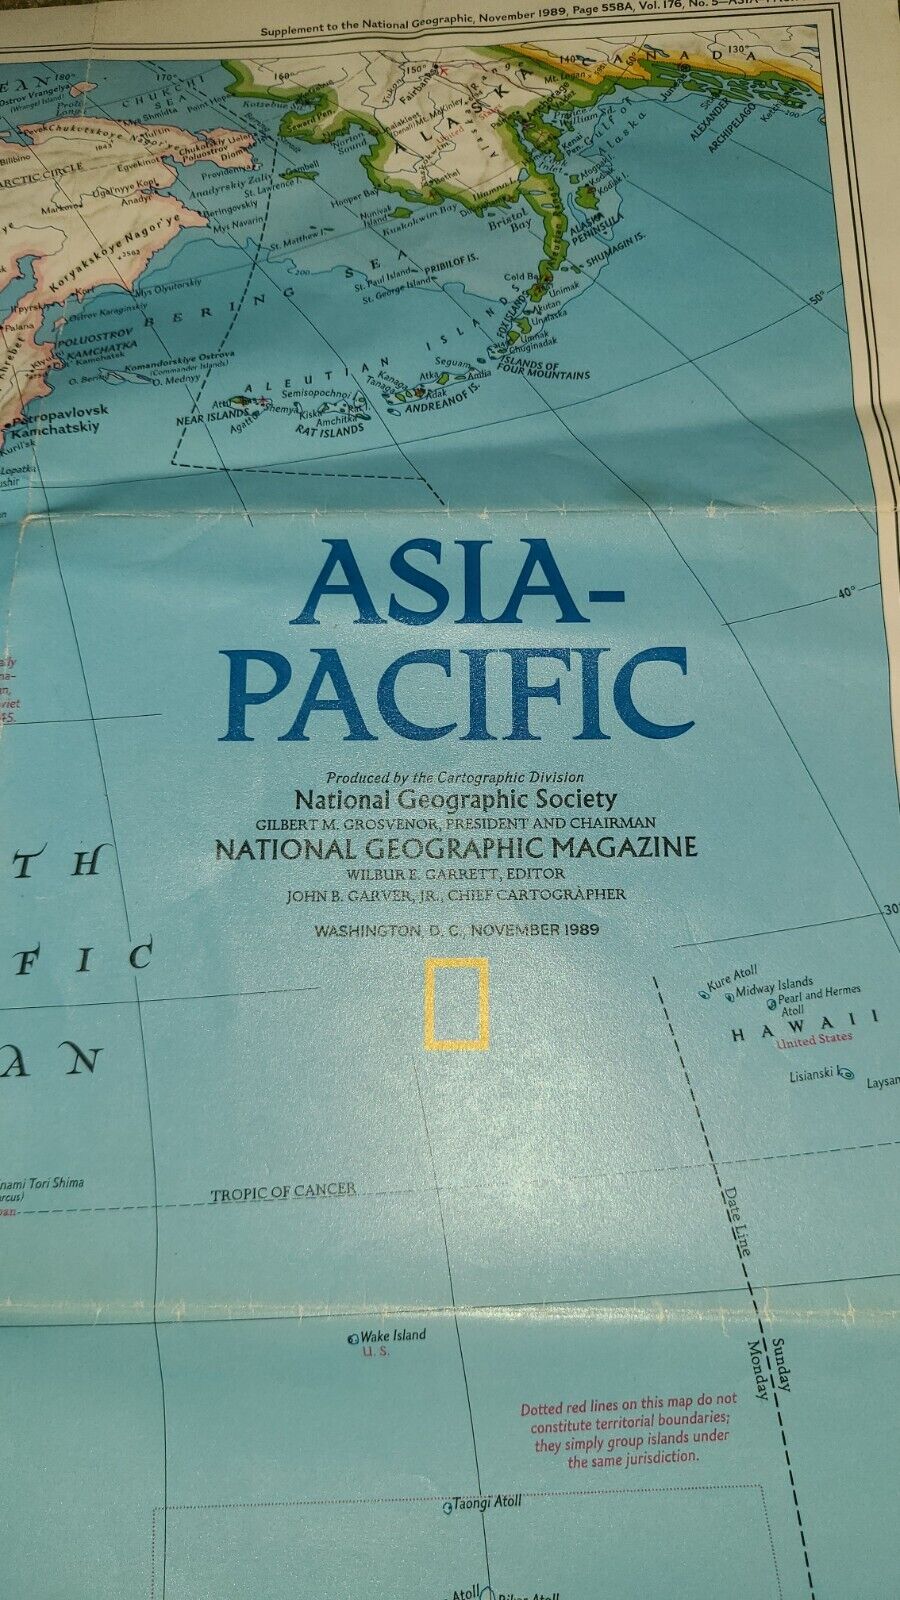 National Geographic - Asia-Pacific Map - November 1989